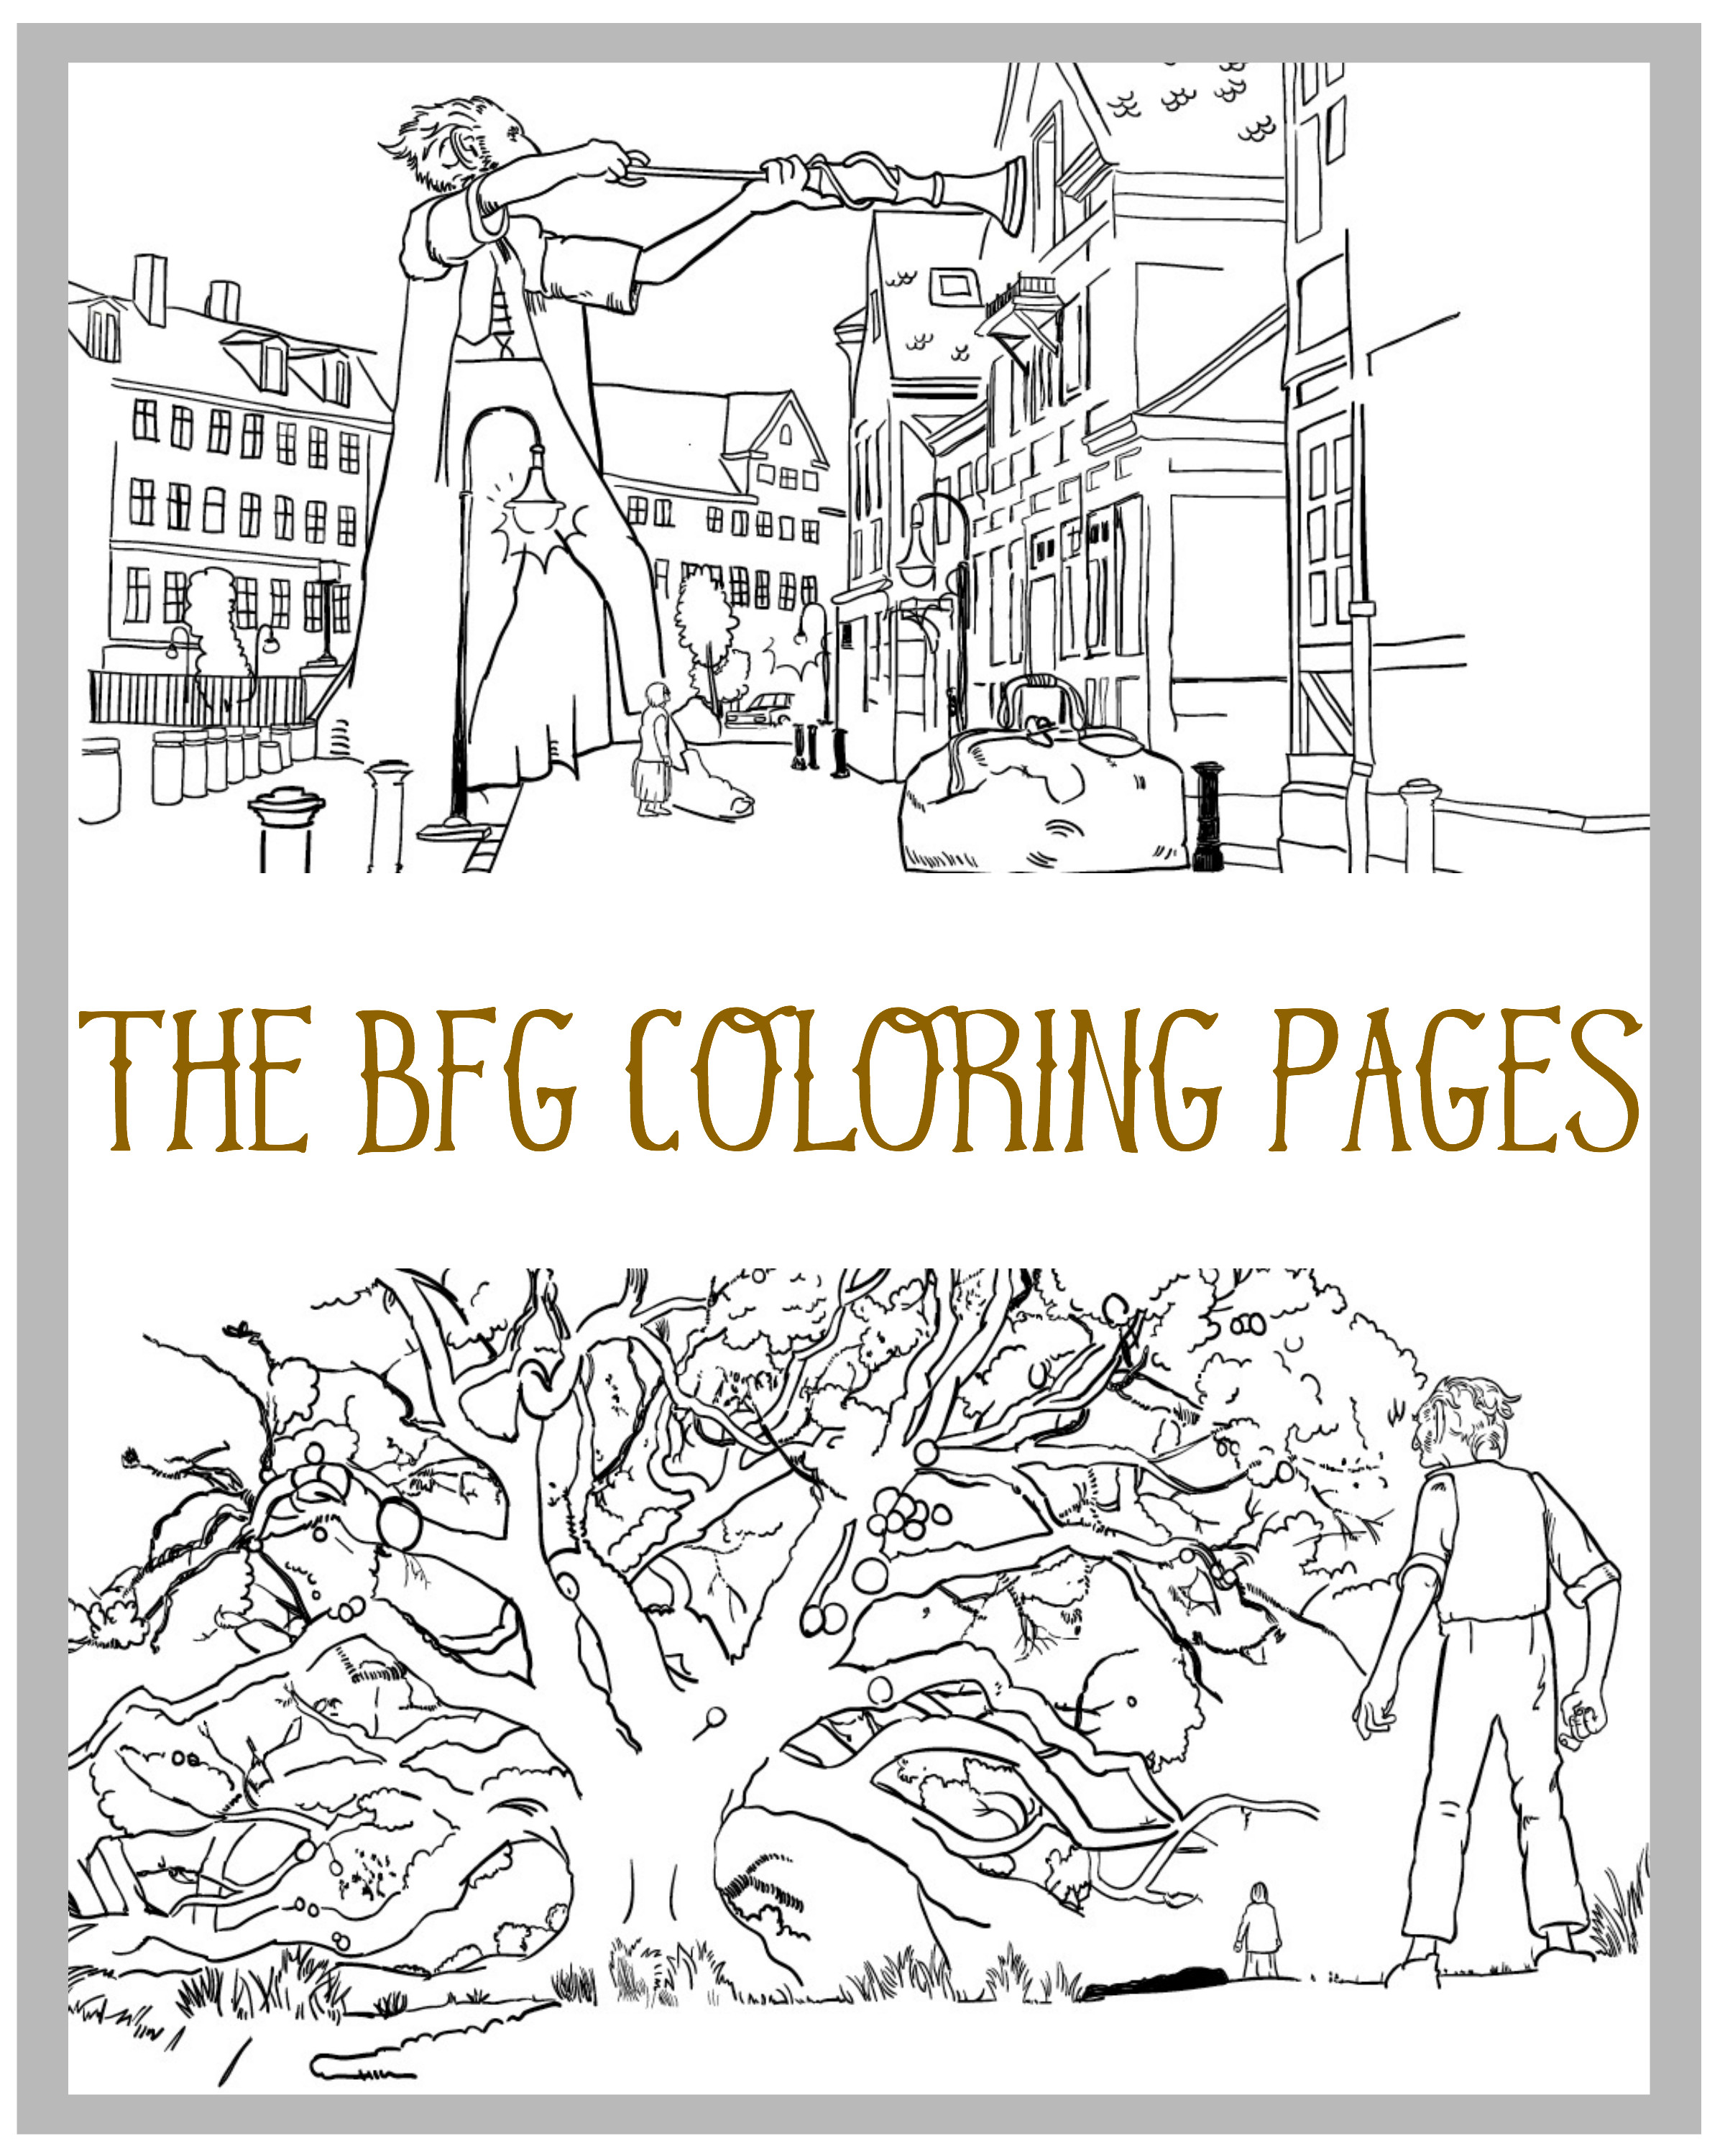 Bfg Coloring Pages
 Free Moana Coloring Pages